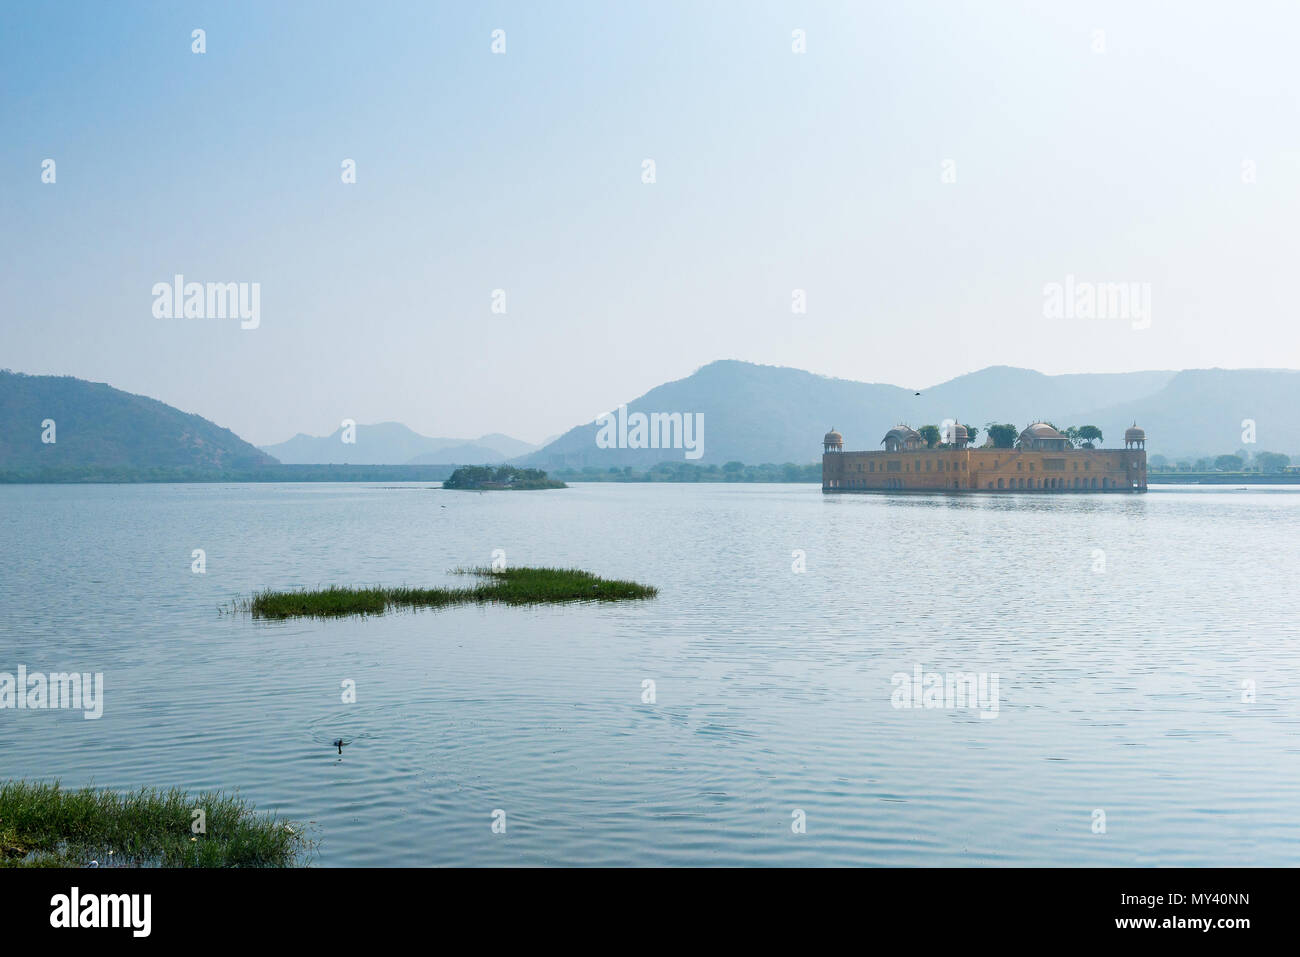 Waterpalace of Jal Mahal in Jaipur Stock Photo